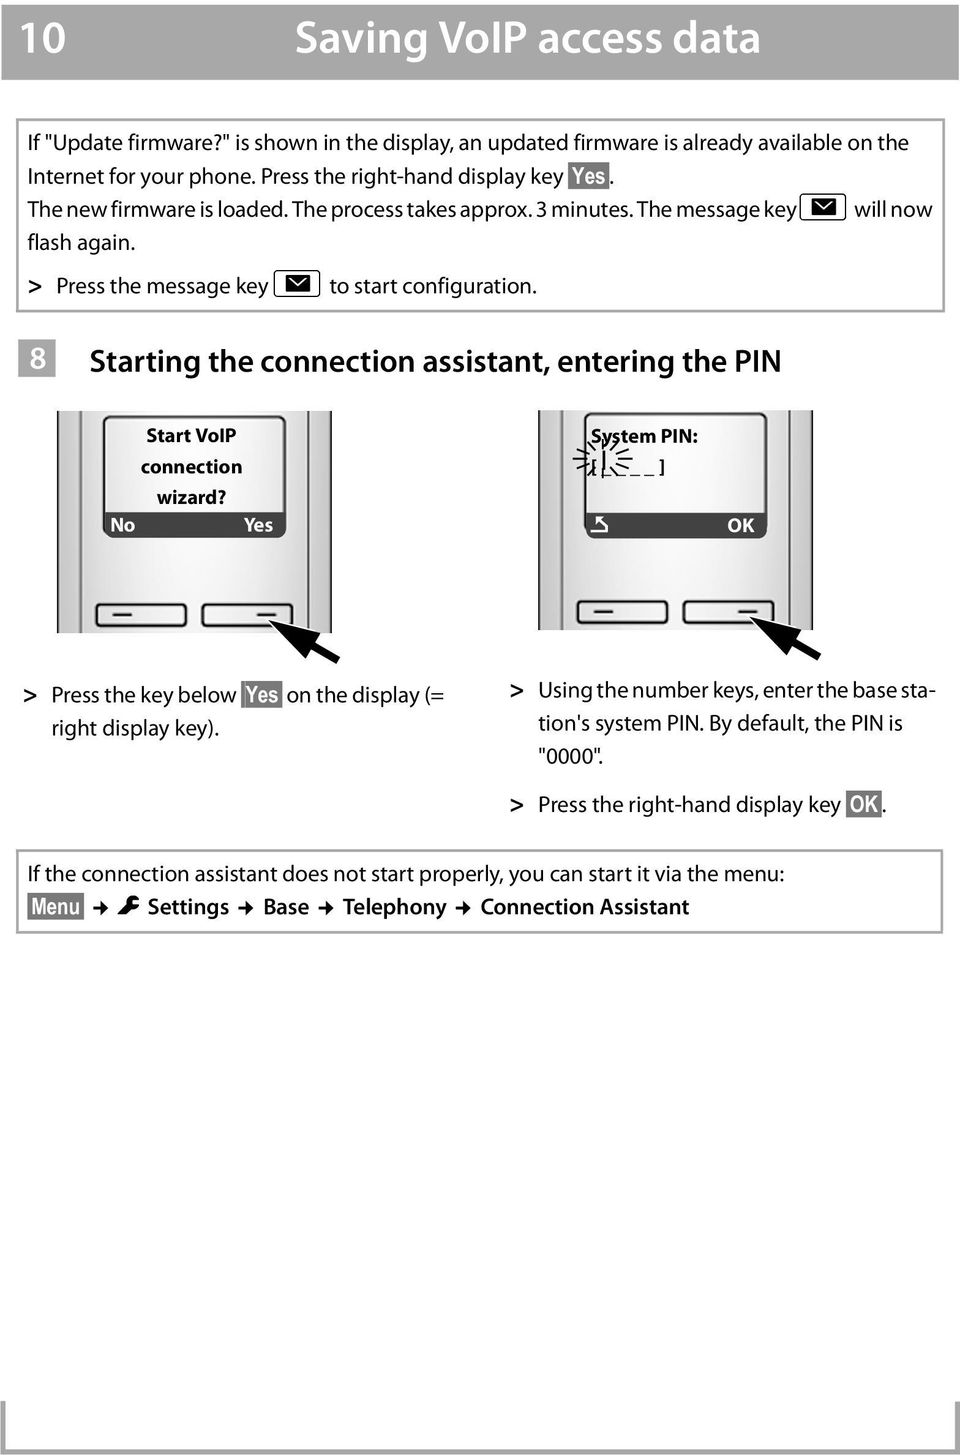 8 Starting the connection assistant, entering the PIN Start VoIP connection wizard? No Yes System PIN: [ ] Ç OK > Press the key below Yes on the display (= right display key).